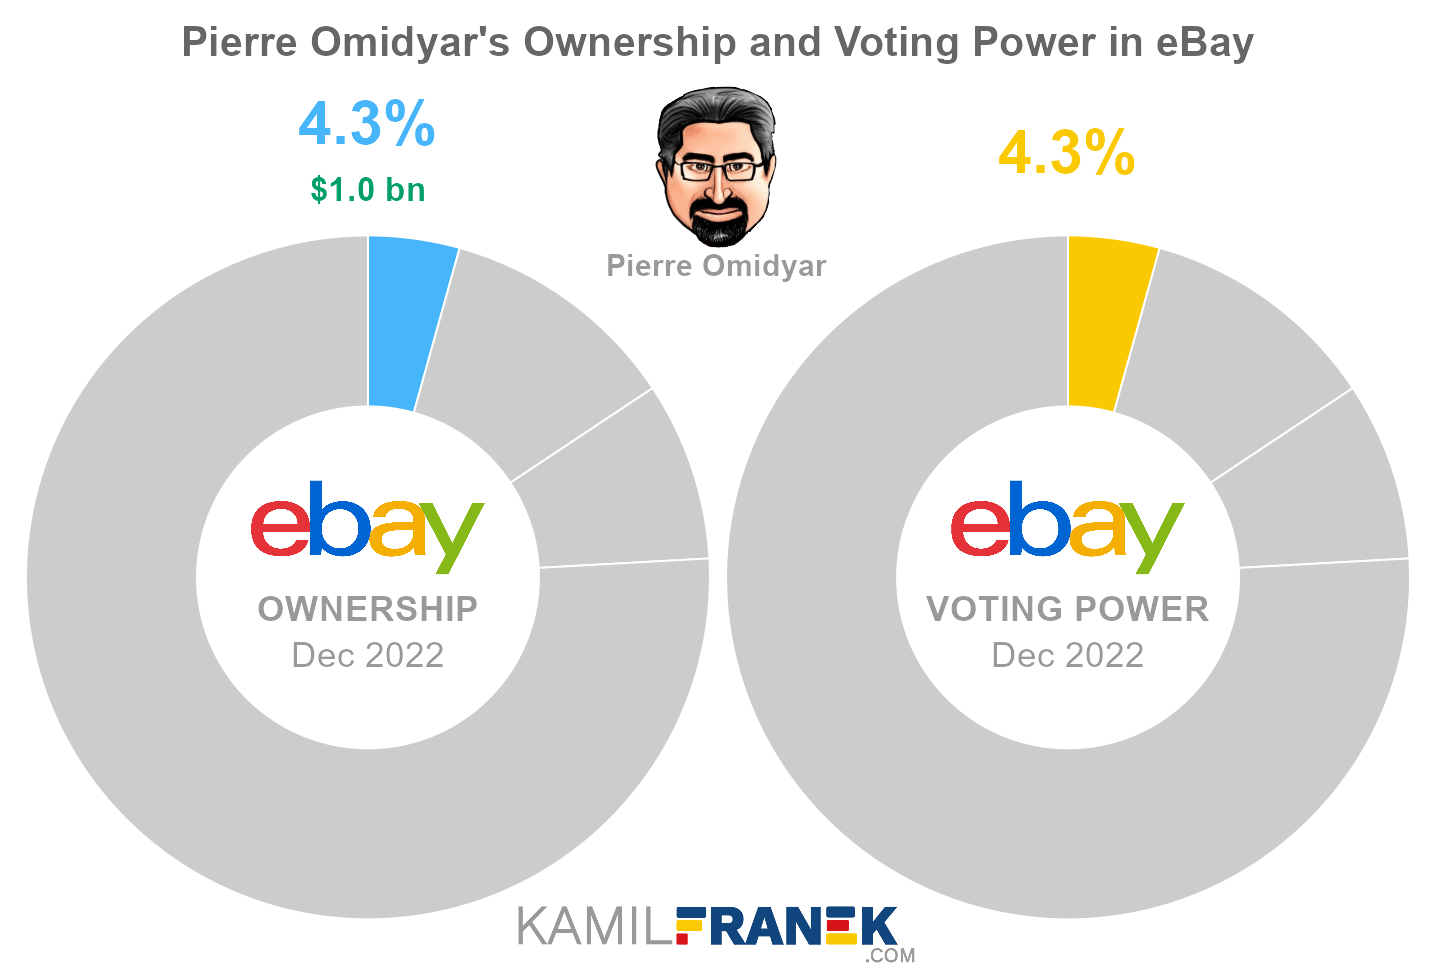 Pierre Omidyar's share ownership and voting power in eBay (chart)